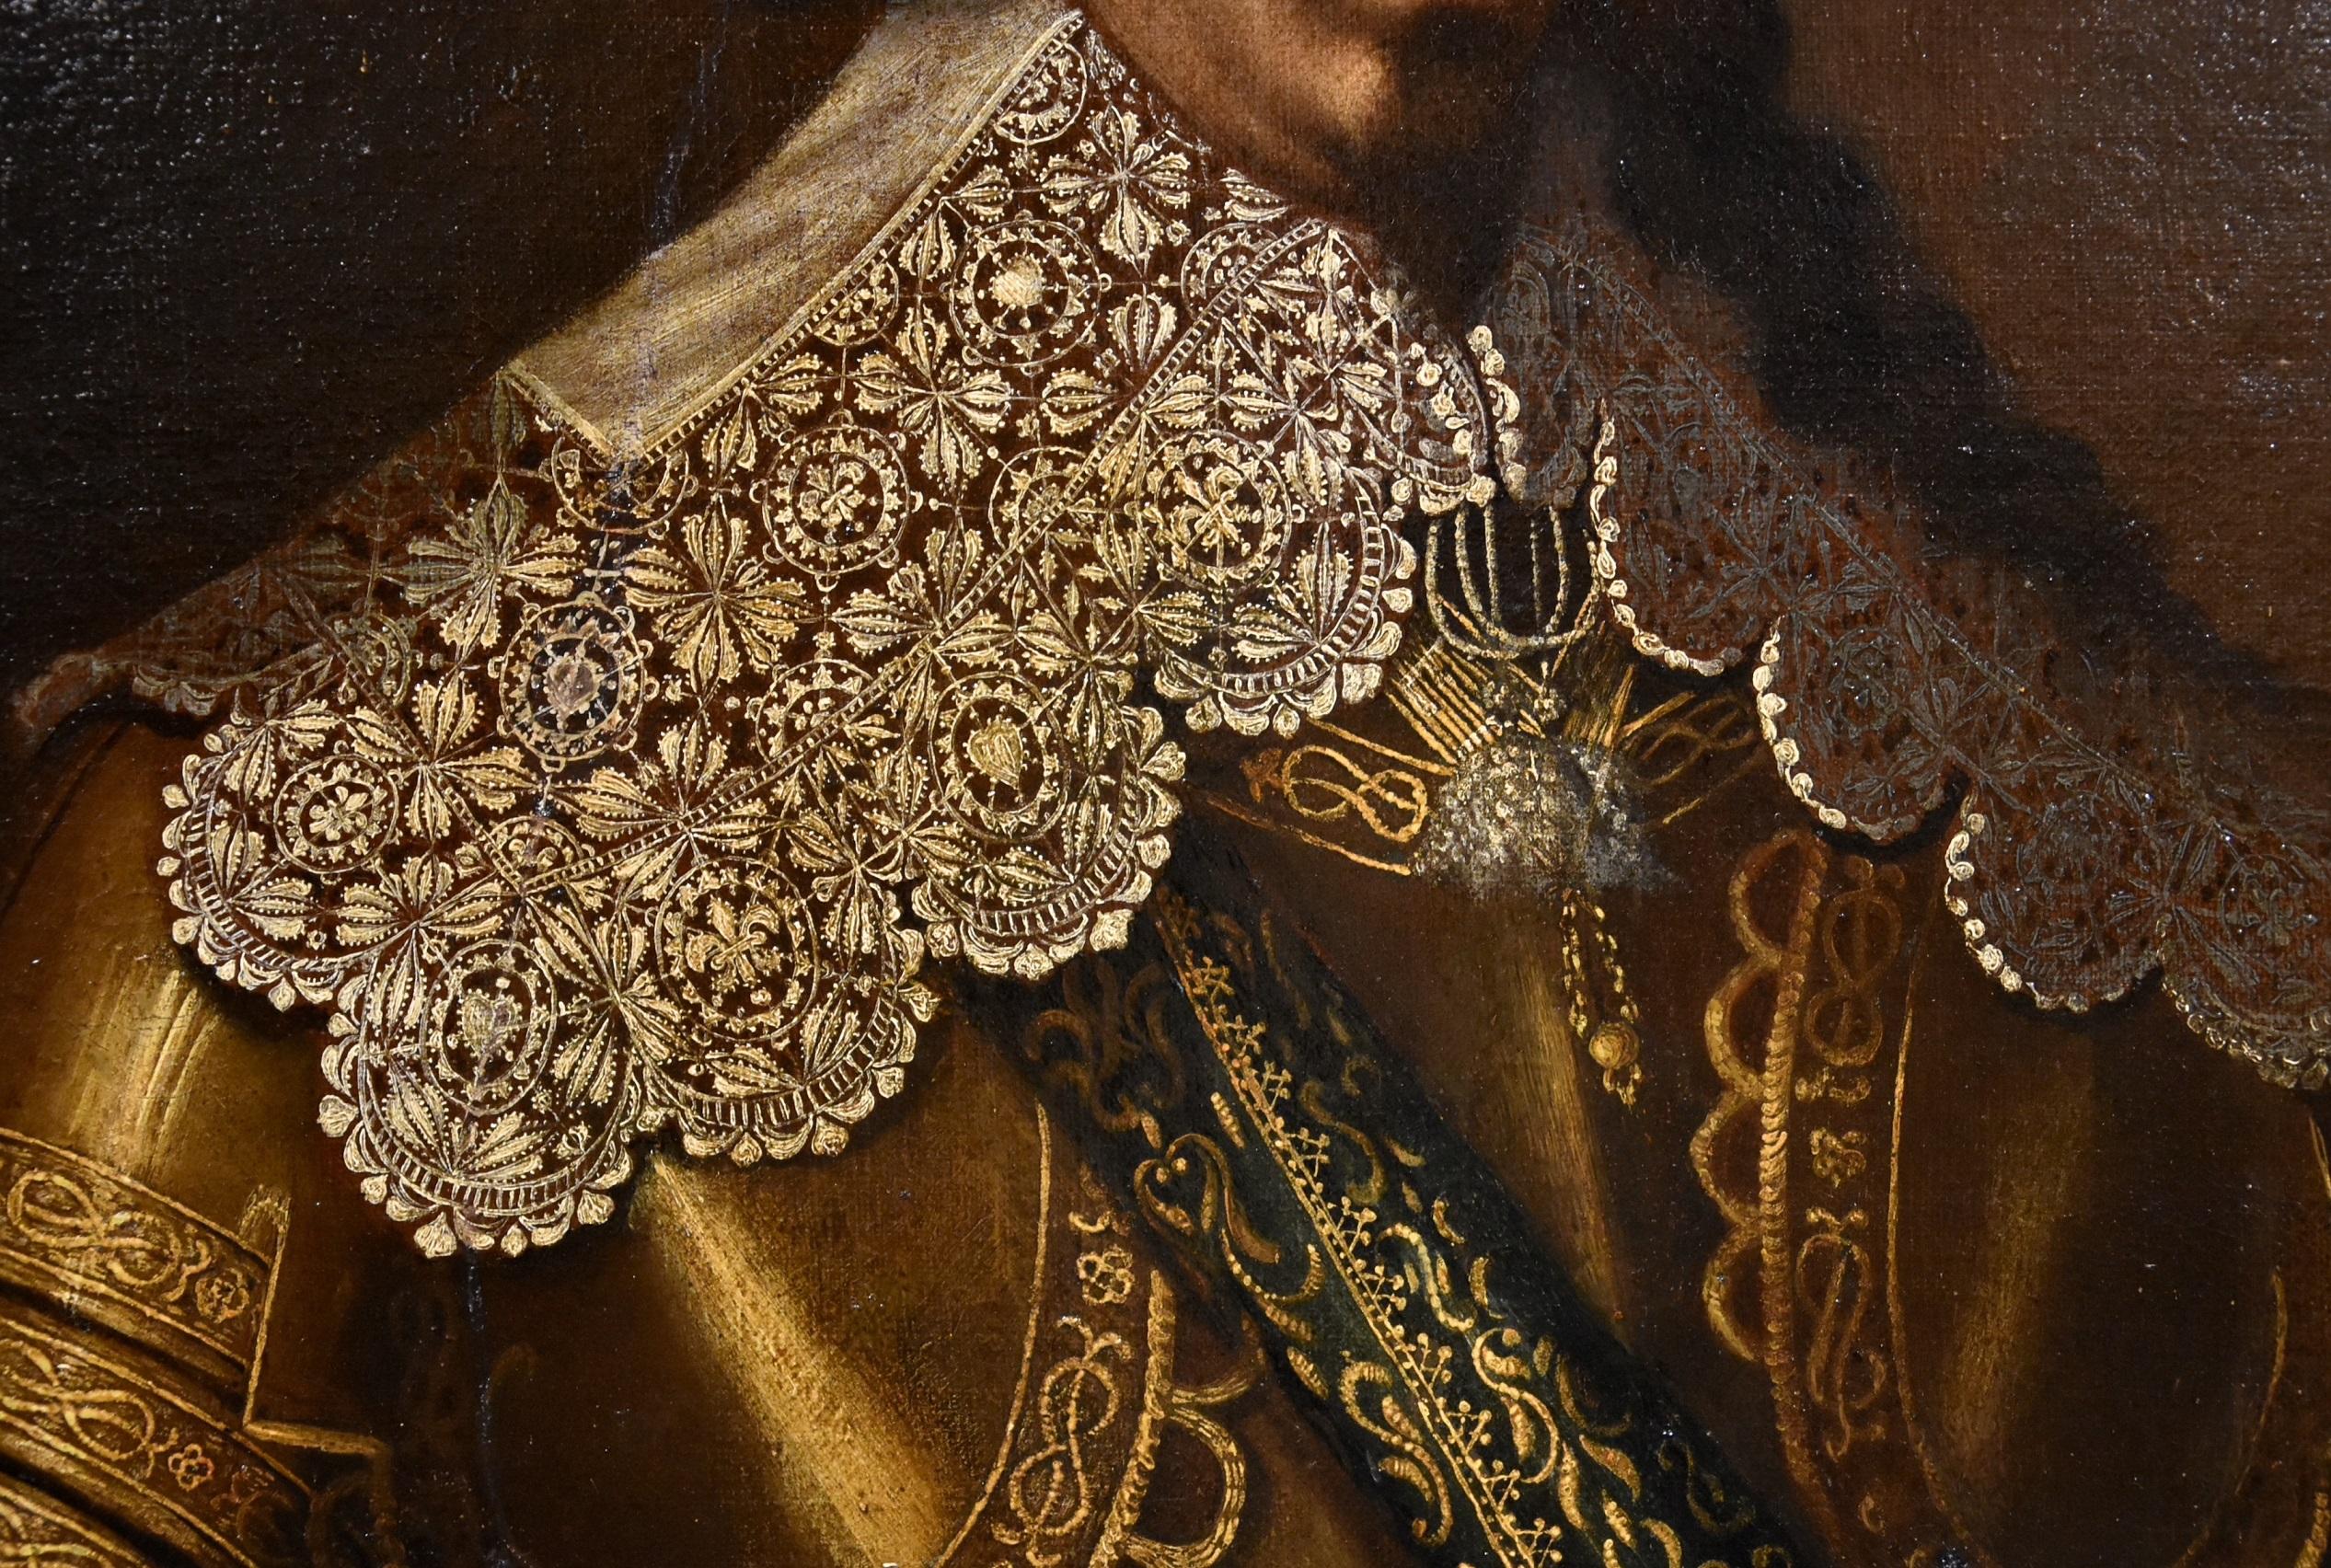 Savoy court painter of the seventeenth century
Portrait of Vittorio Amedeo I, Duke of Savoy (Turin, 1587 - Vercelli, 1637)
marquis of Saluzzo, prince of Piedmont and count of Aosta, Moriana and Nizza from 1630 to 1637, as well as titular king of